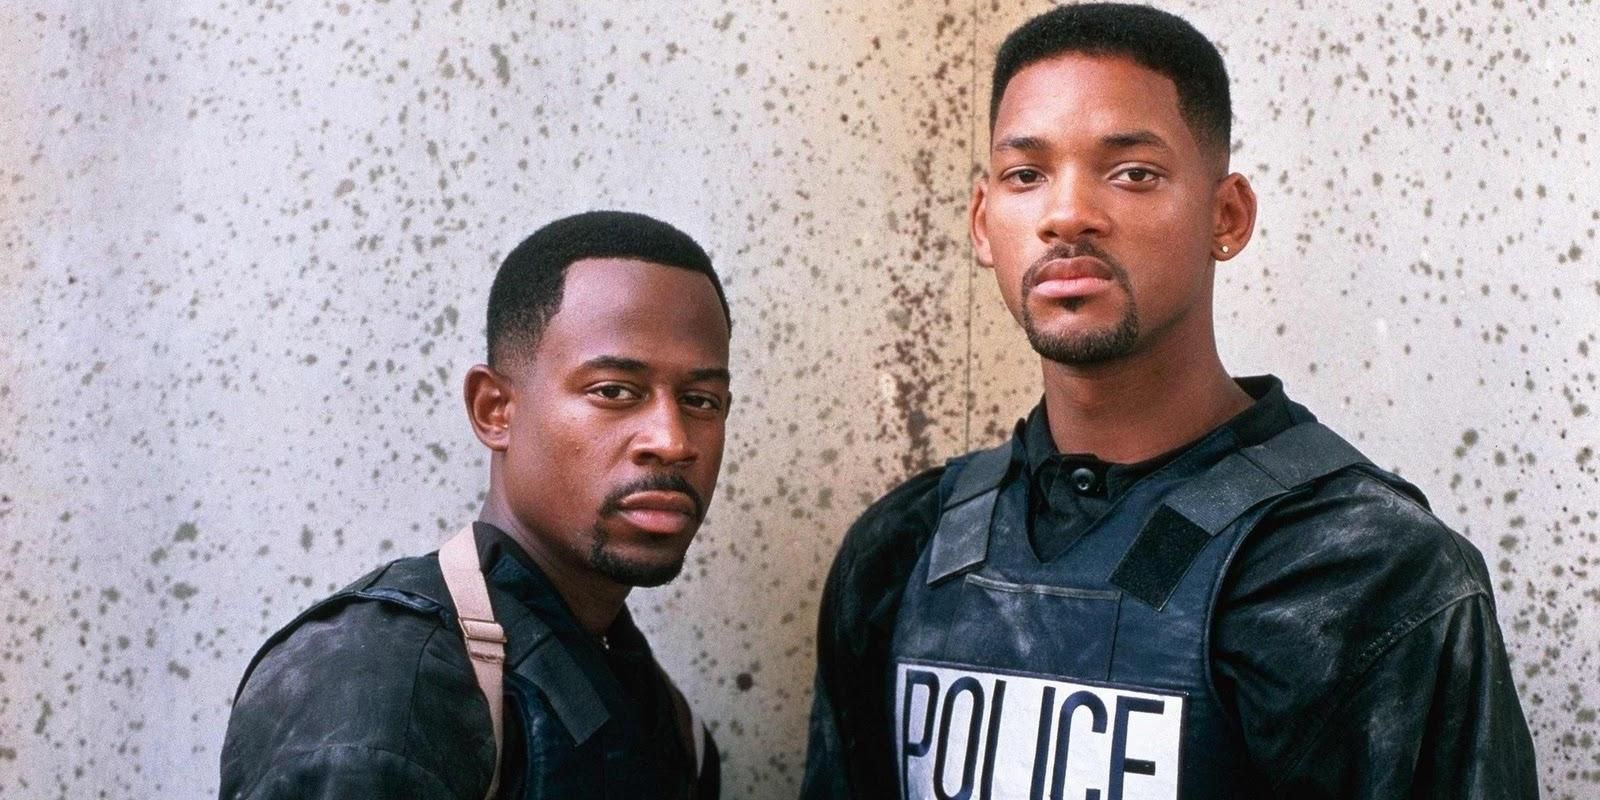 Martin Lawrence and Will Smith standing in front of a white and gray wall in Bad Boys